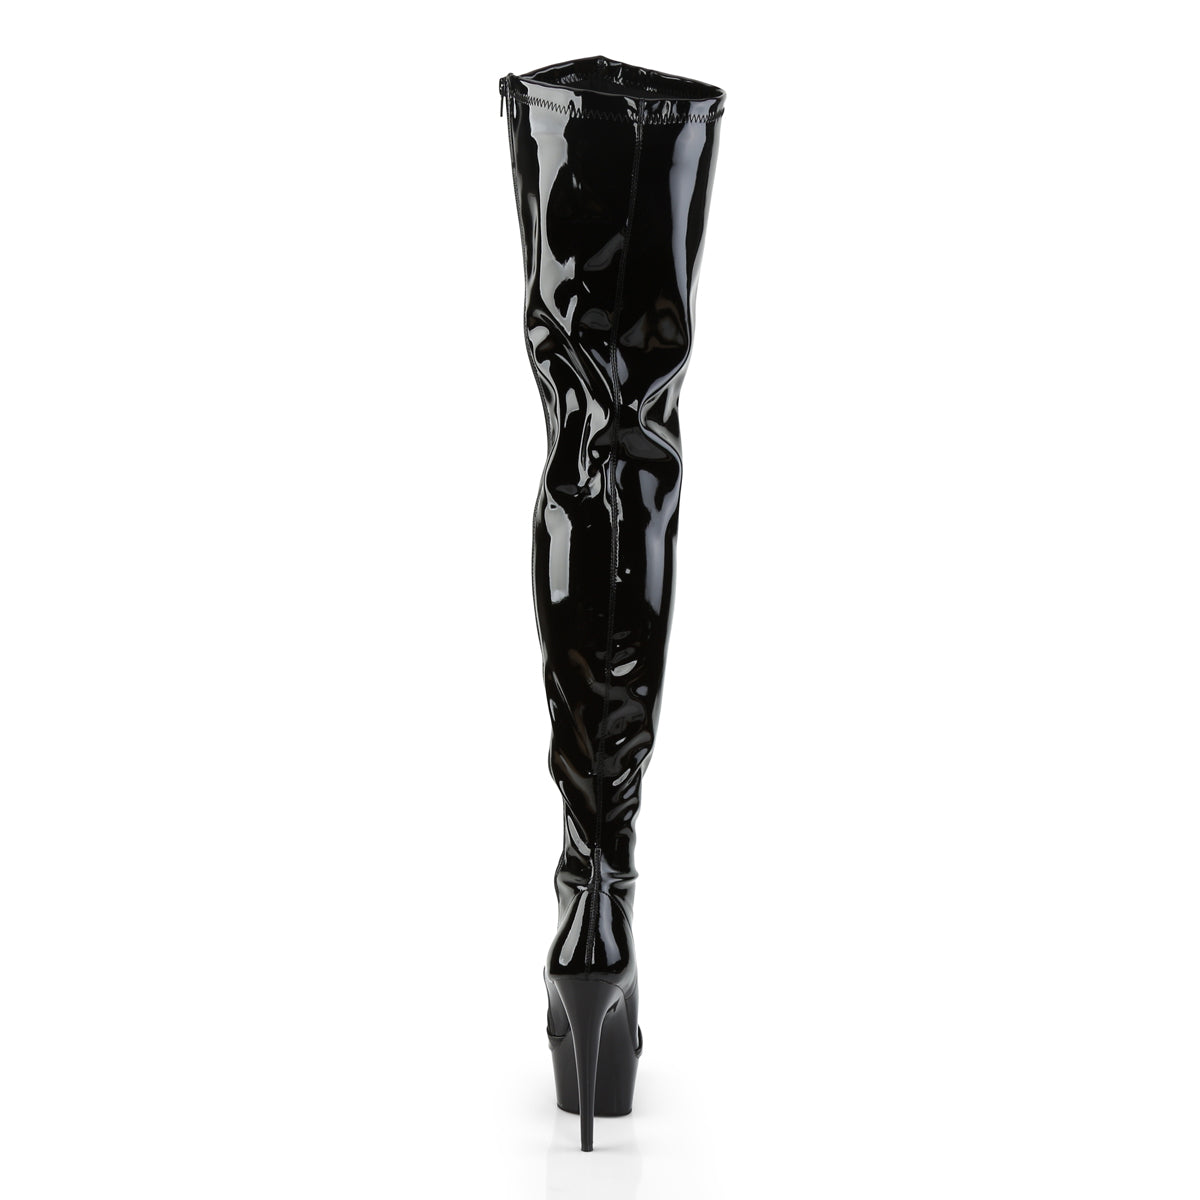 DELIGHT-4000 Black Thigh High Boots Black Multi view 3